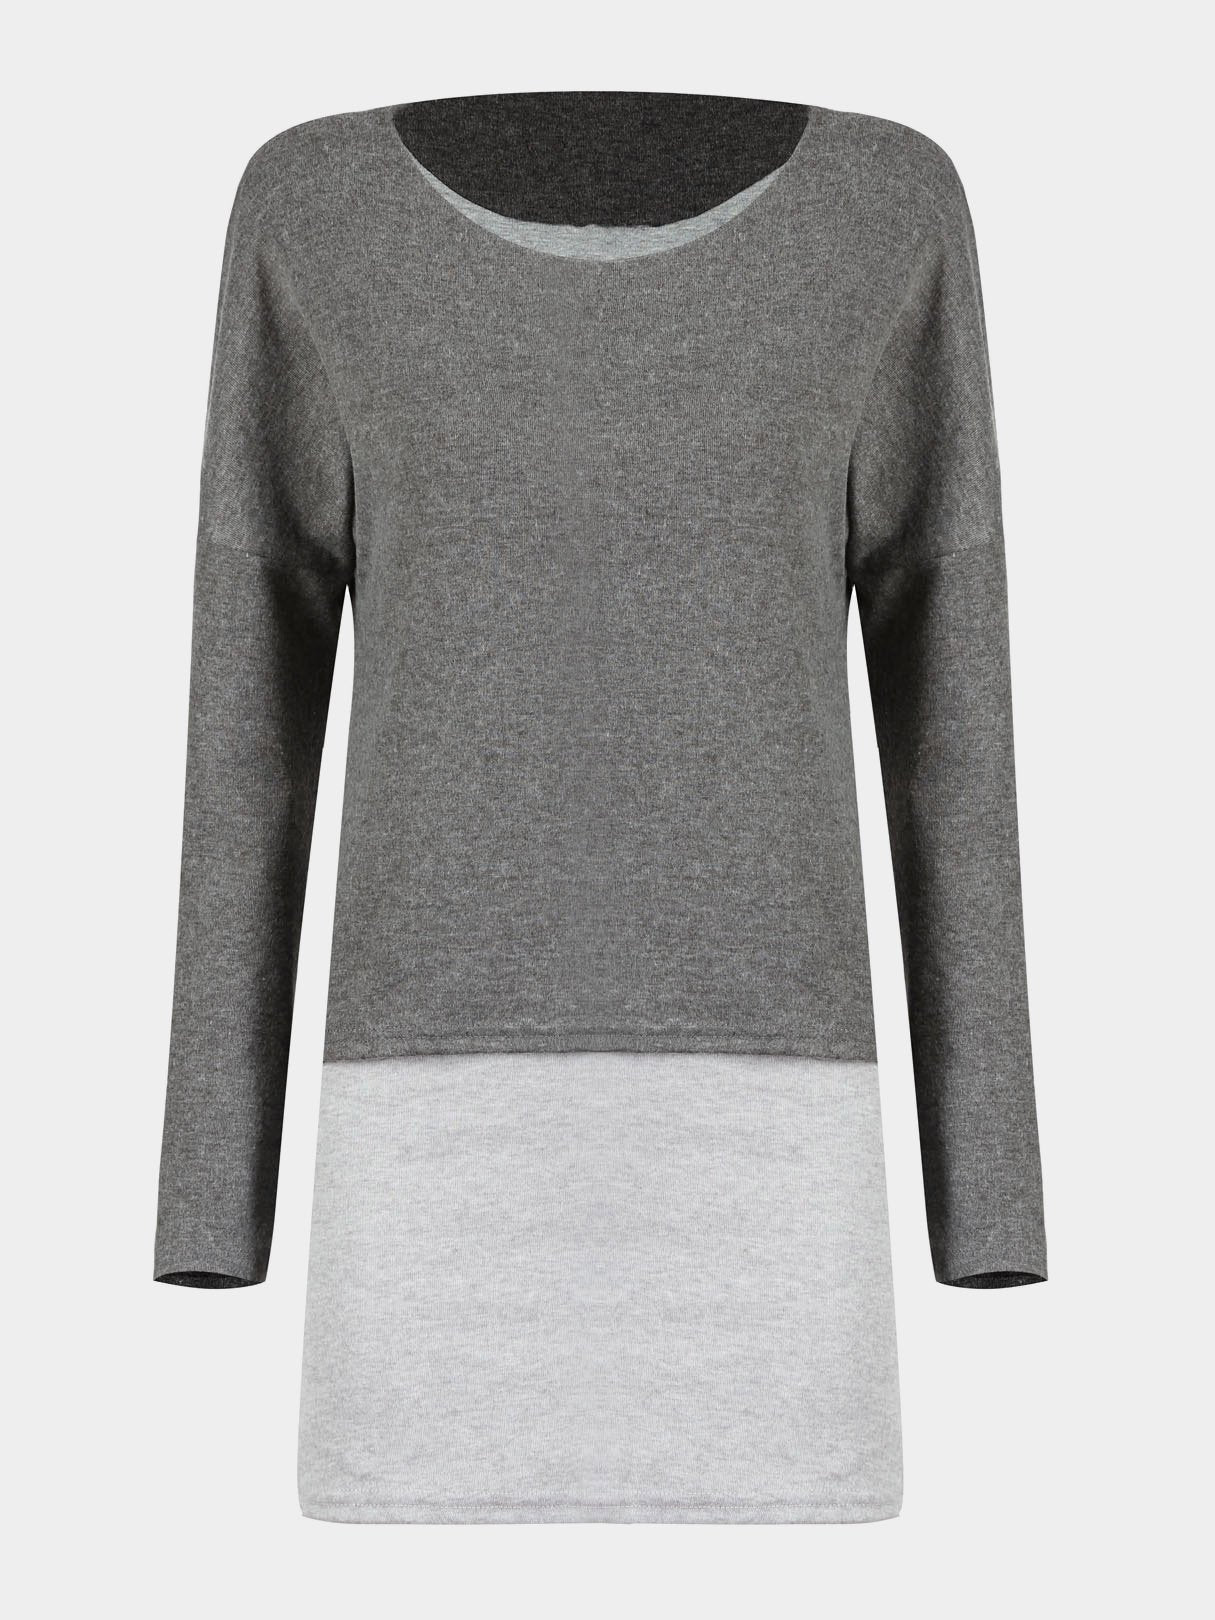 Wholesale Double Layer Grey Top 